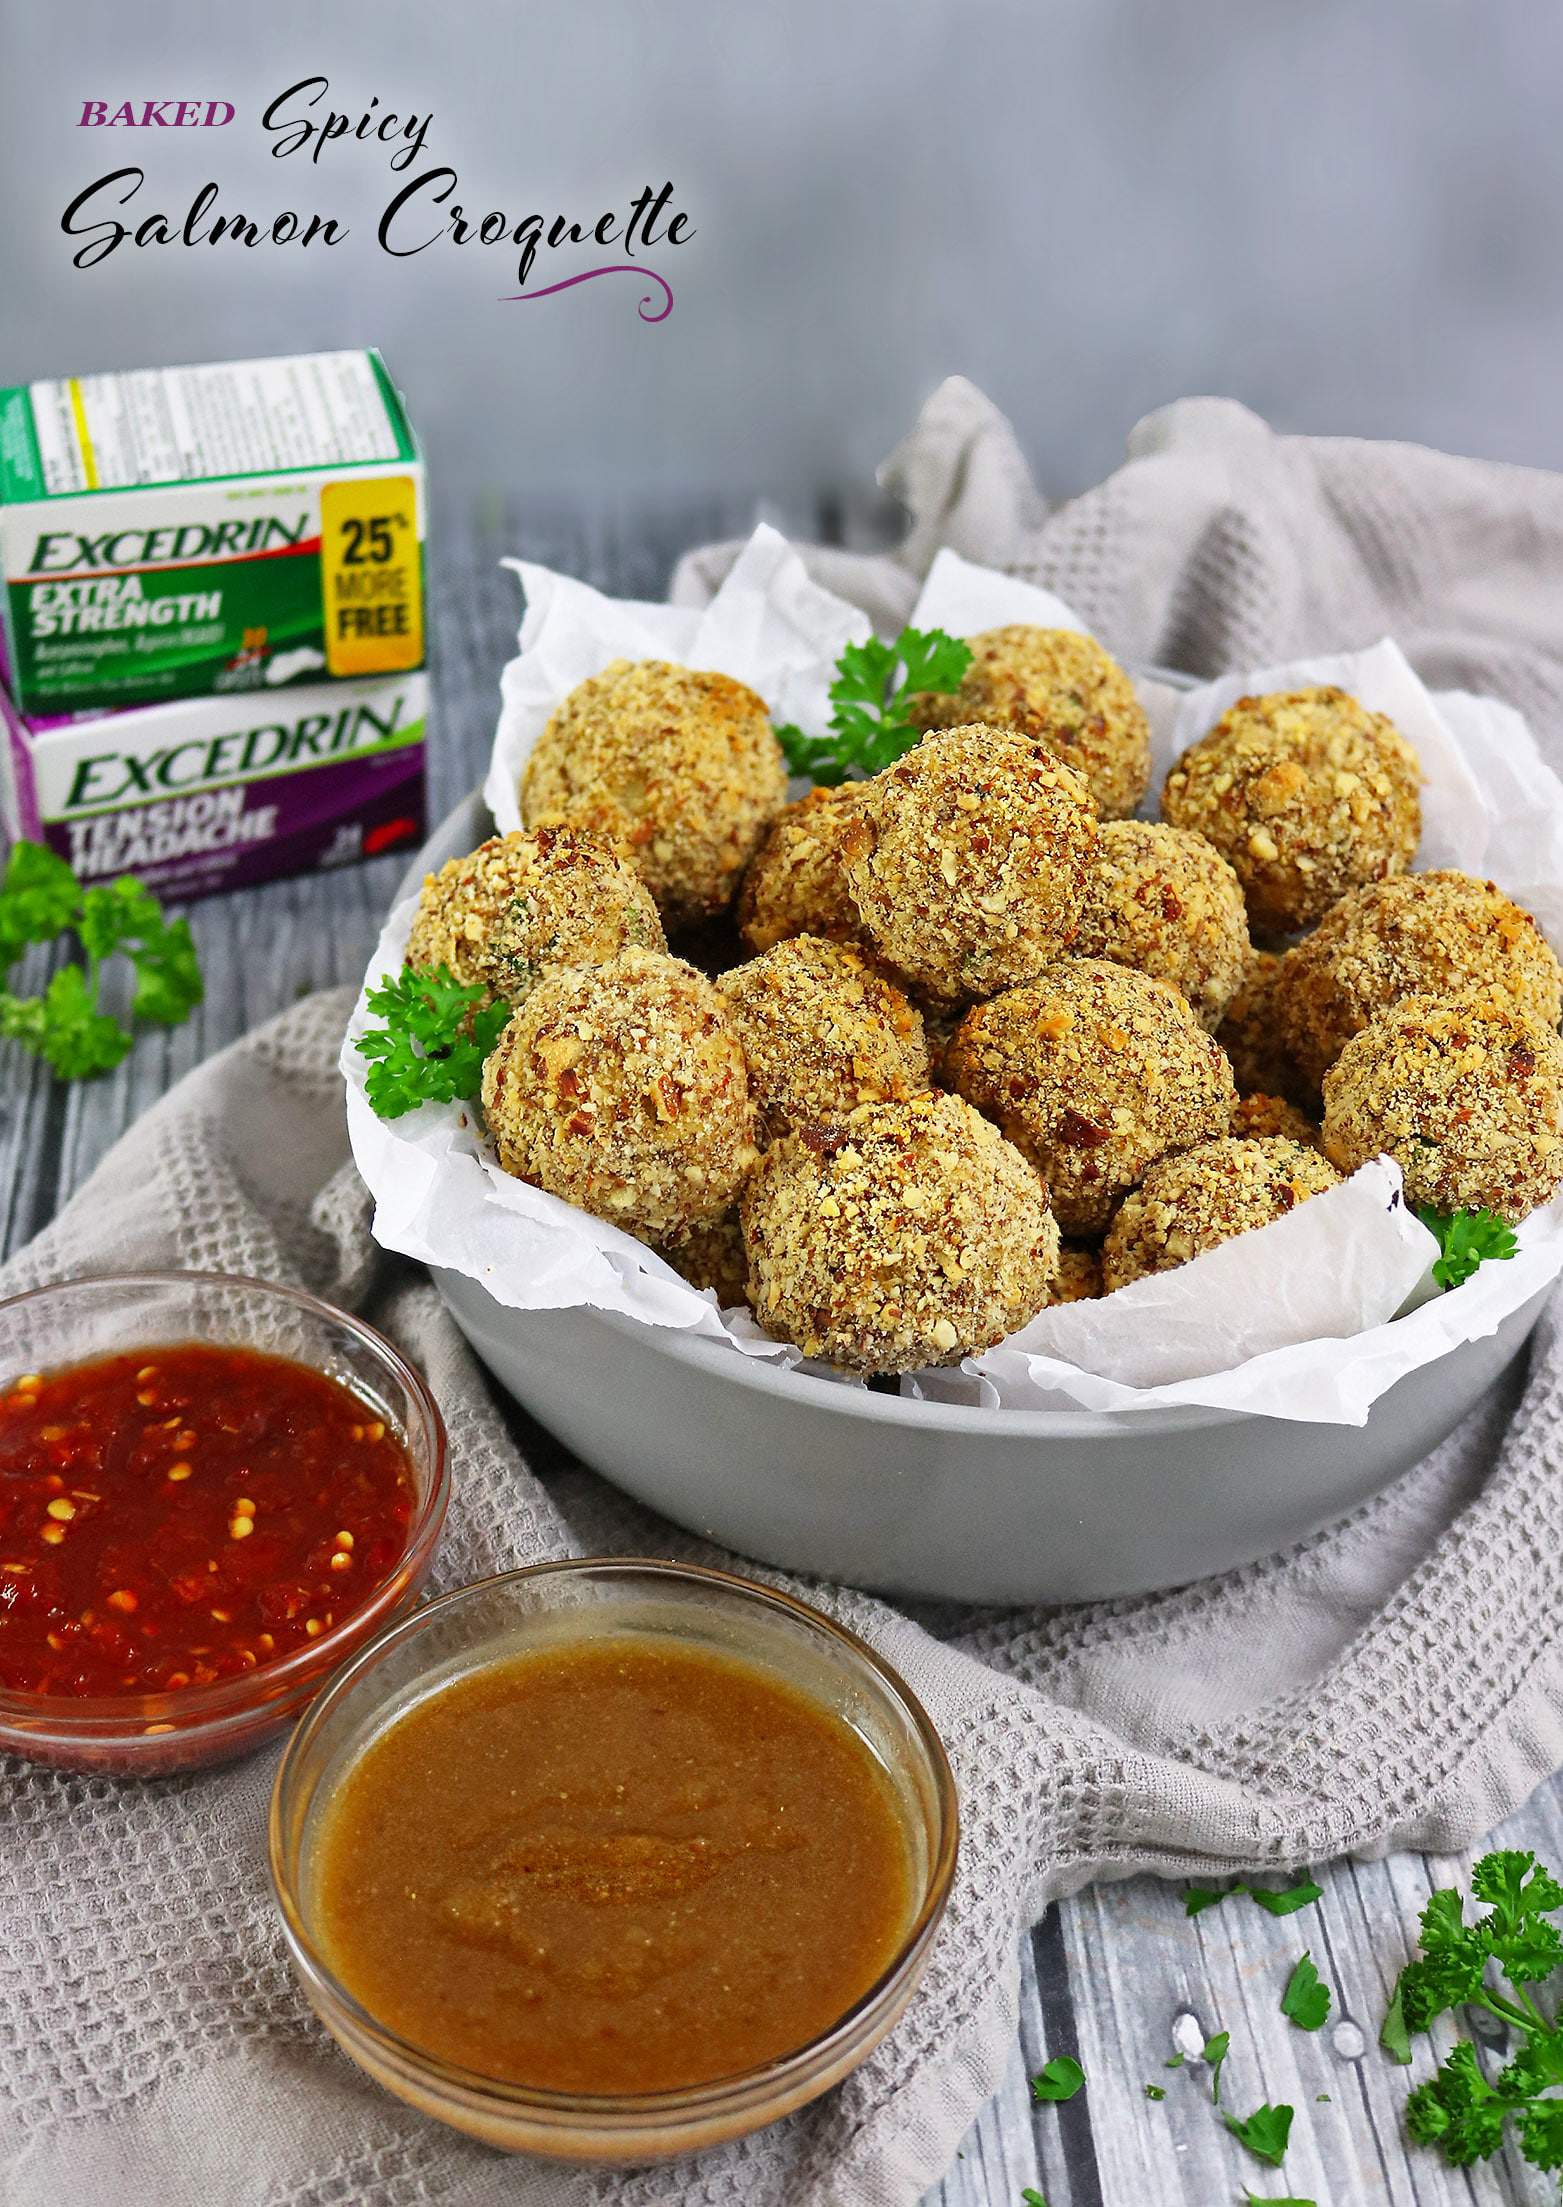 Baked Spicy Salmon Croquettes